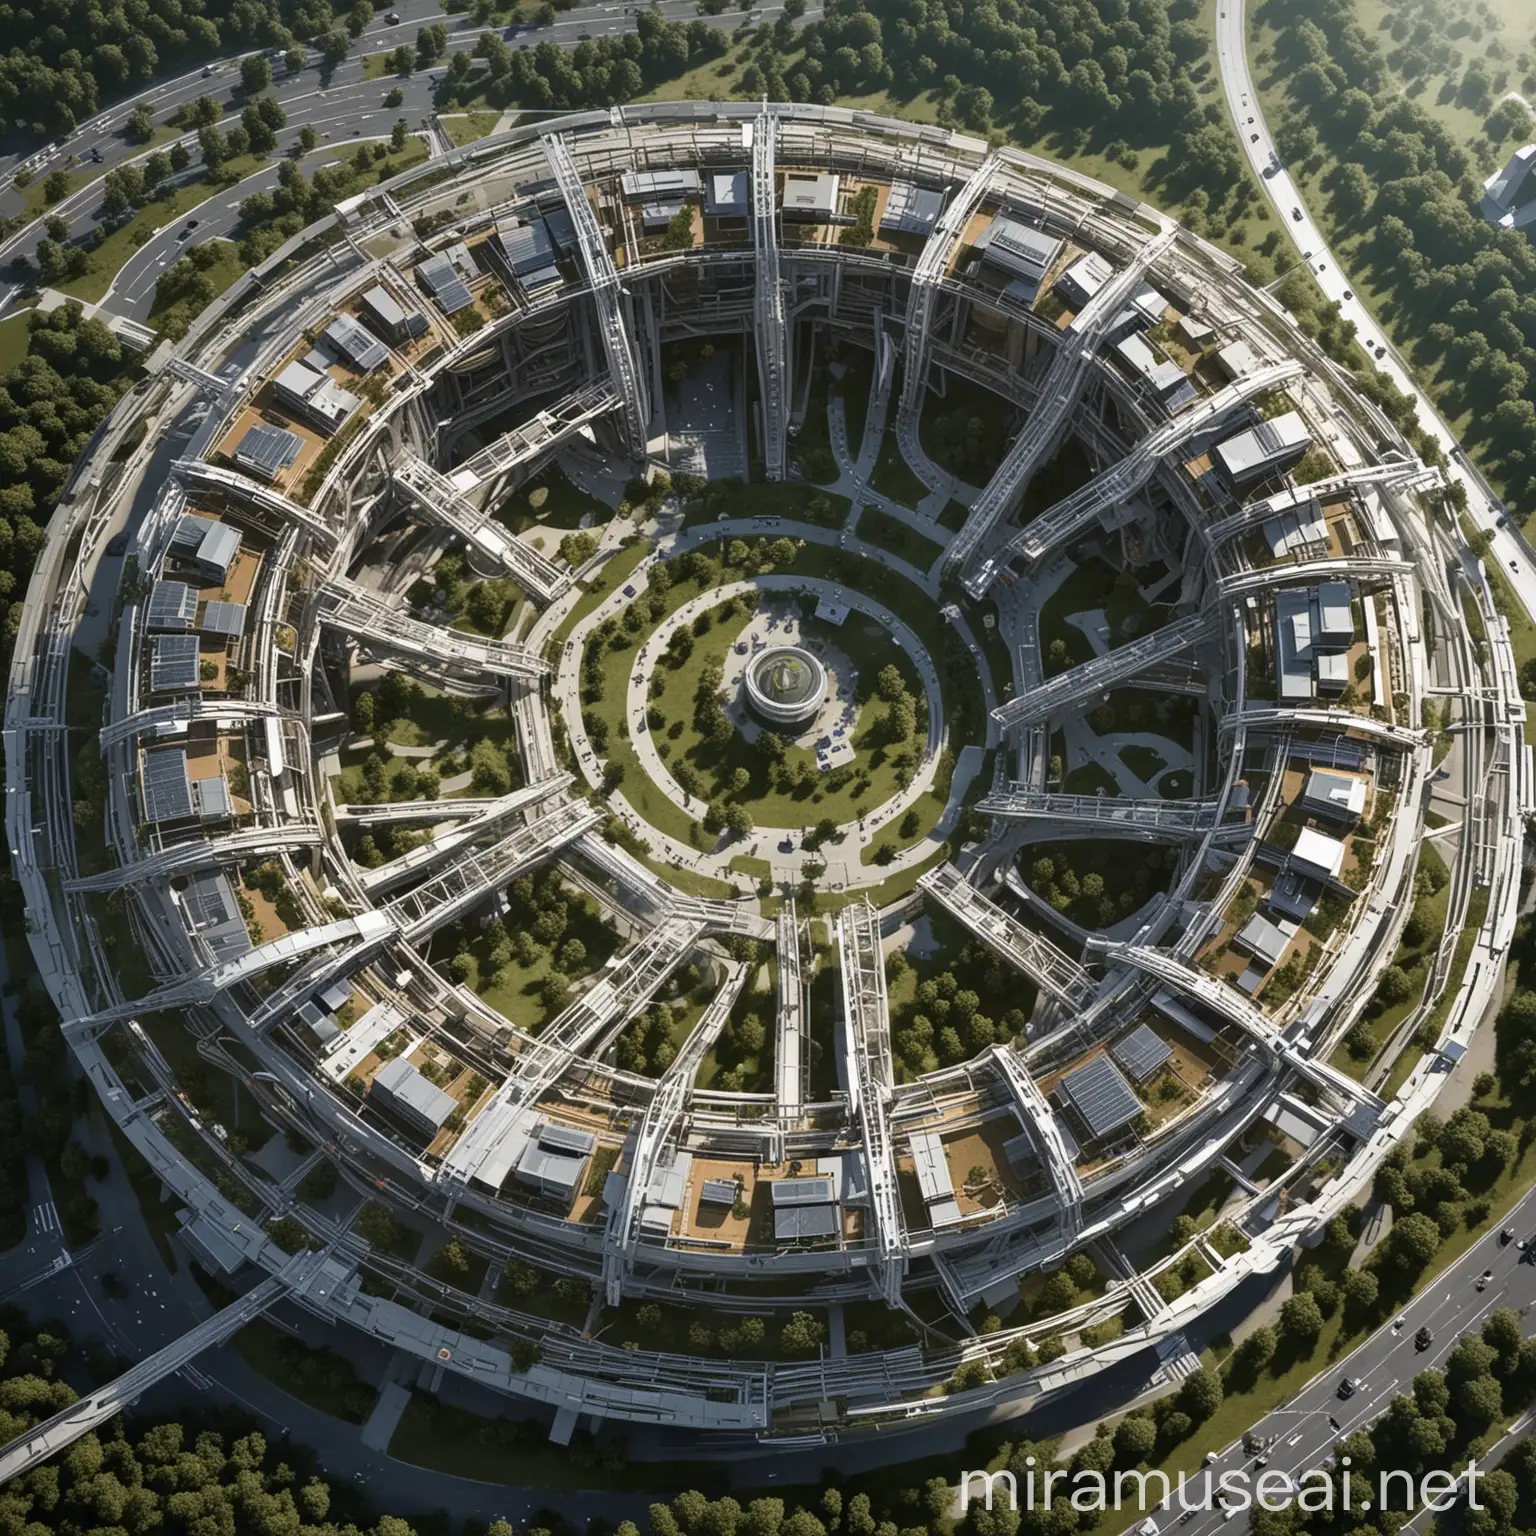 Futuristic Space Complex Interconnected Buildings and Steel Structures